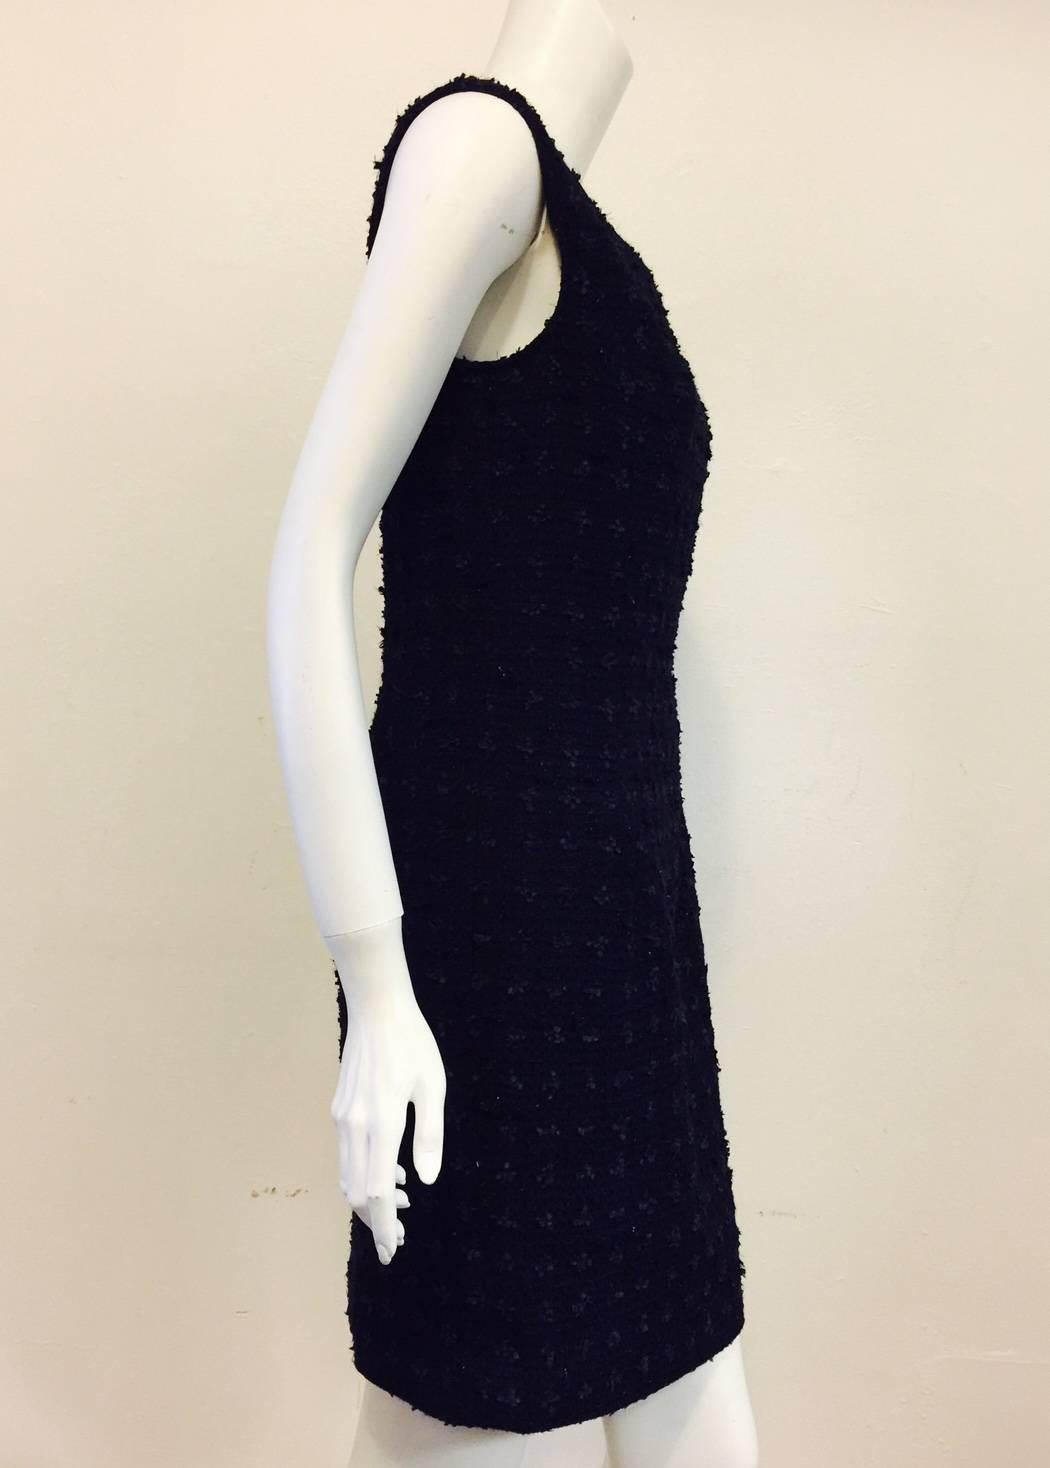 This Oscar de la Renta dress perfectly marries old-world techniques with modern design.  Features a sophisticated black and navy woven tweed fabric shell, sleeveless design and classic, knee-length.  Round neckline and rear hidden zipper with hook